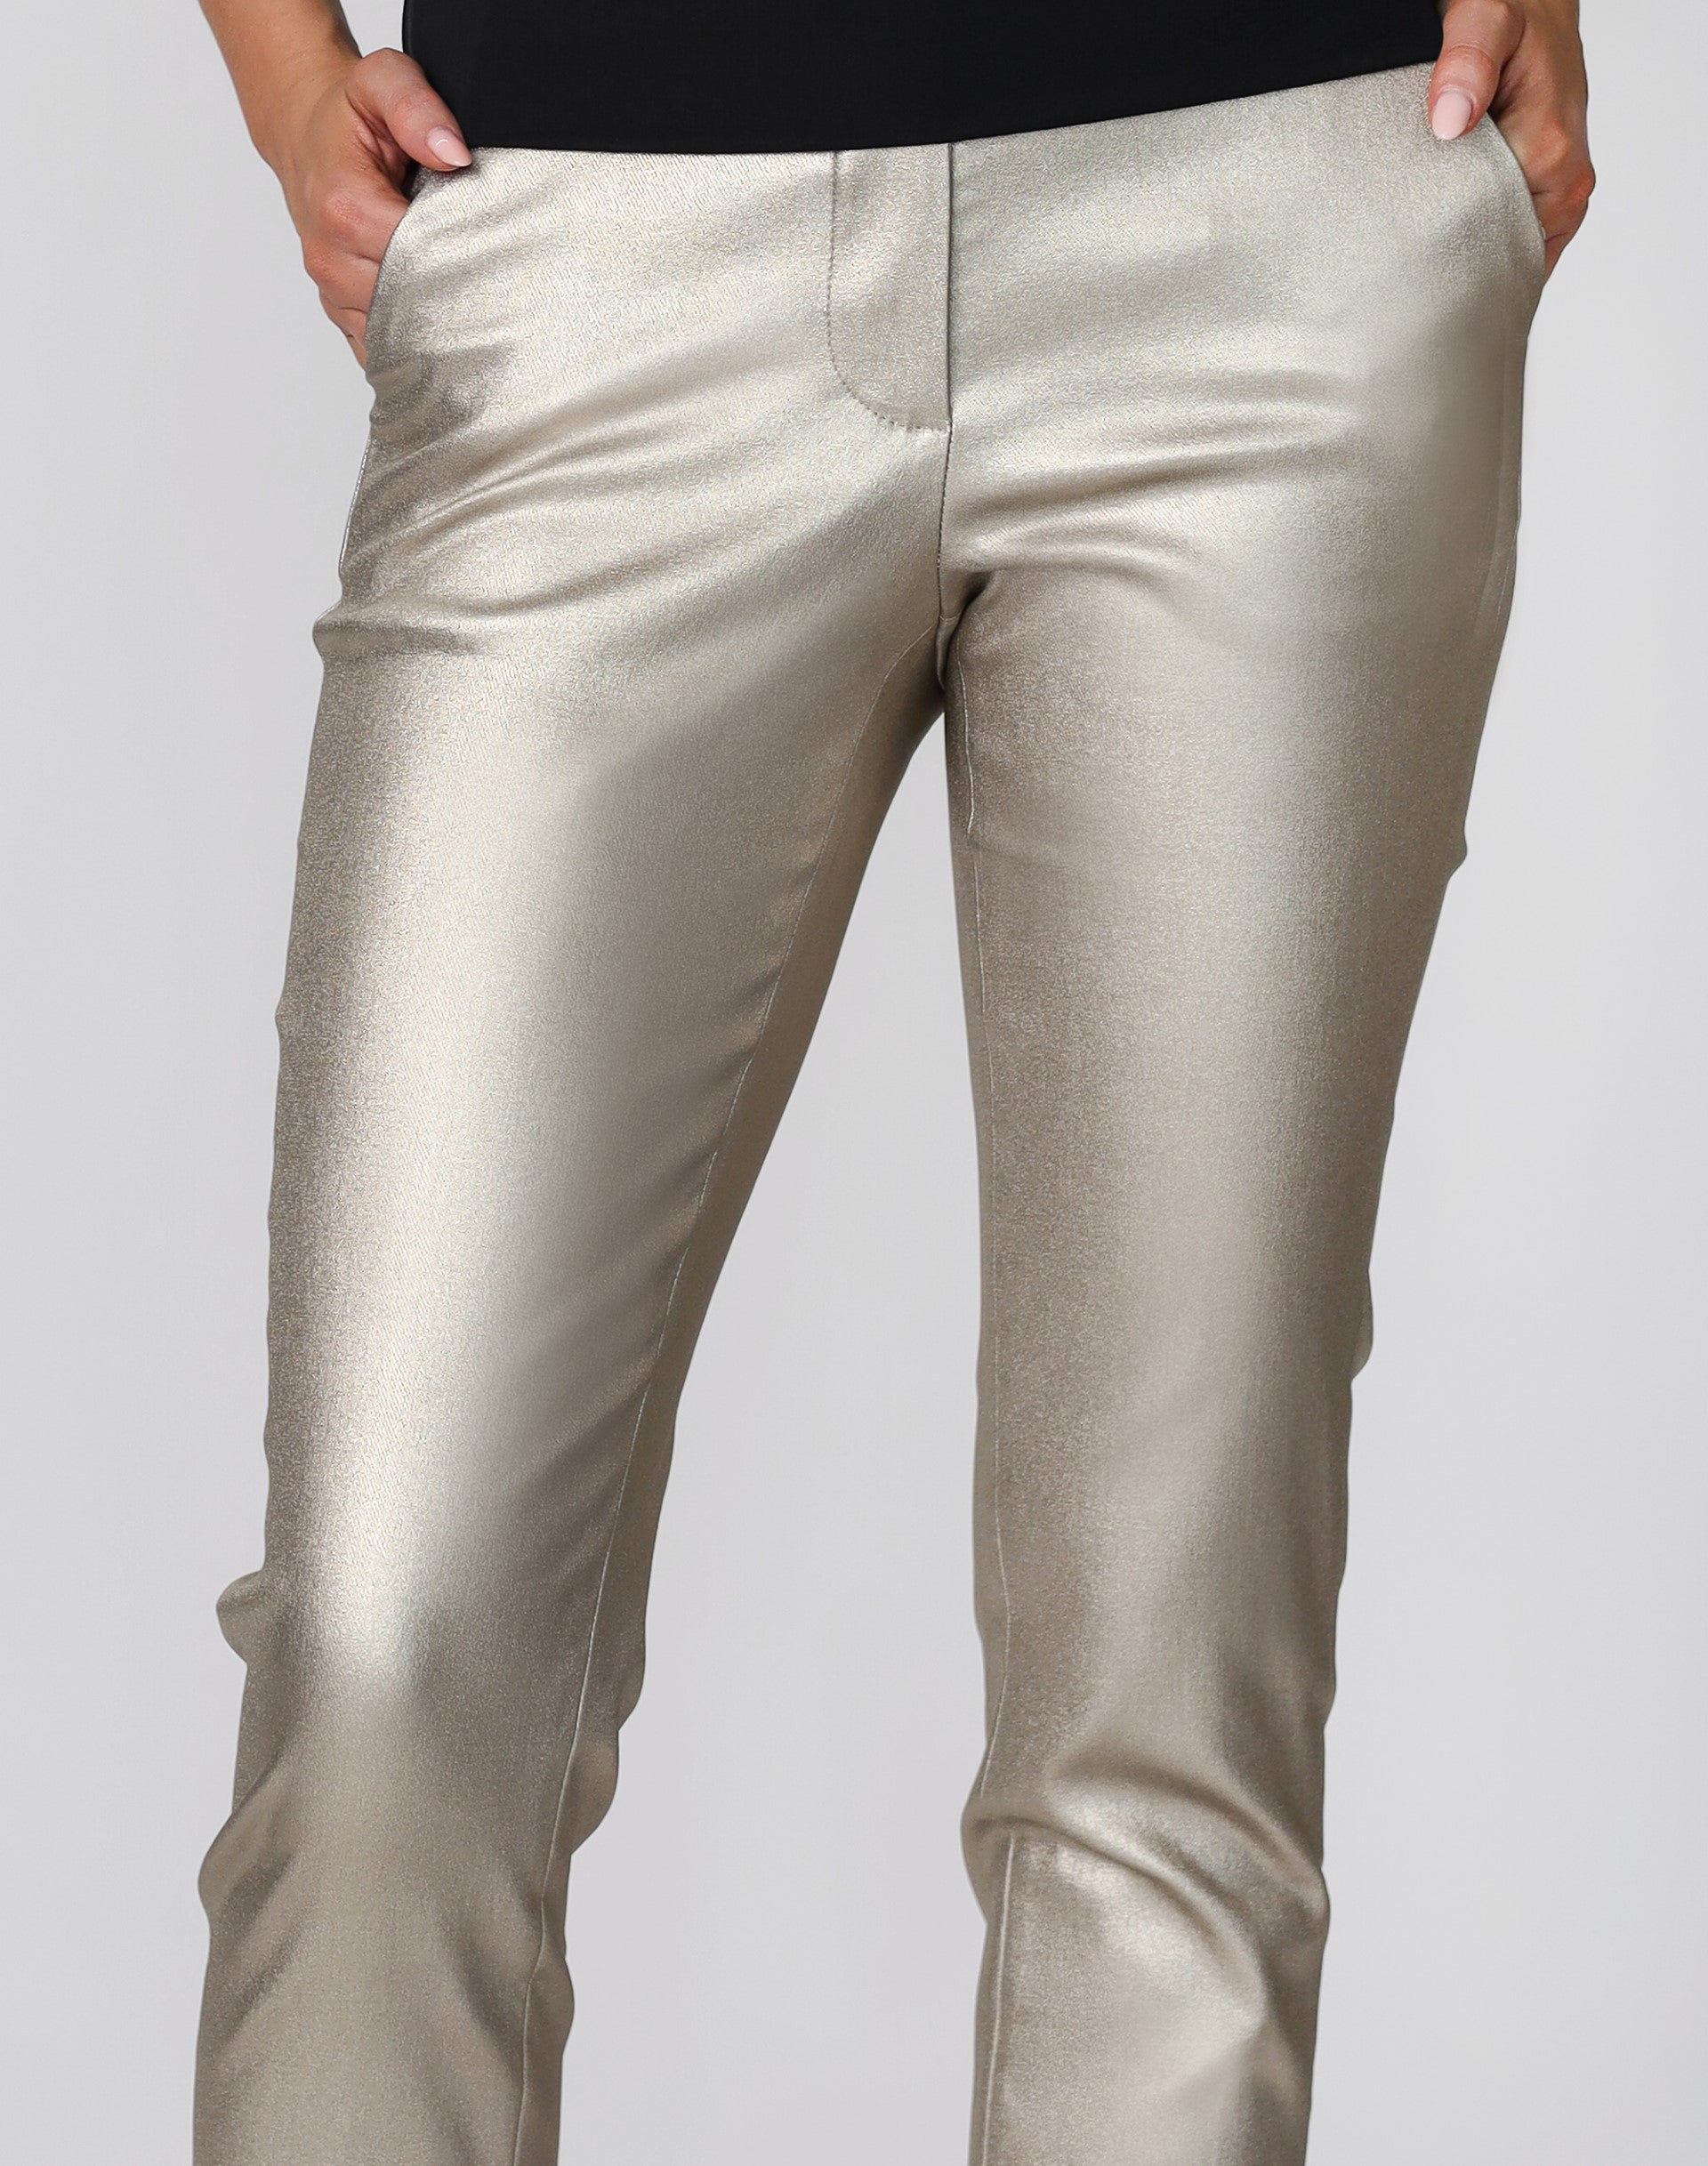 High Waisted Leather Trousers For Women